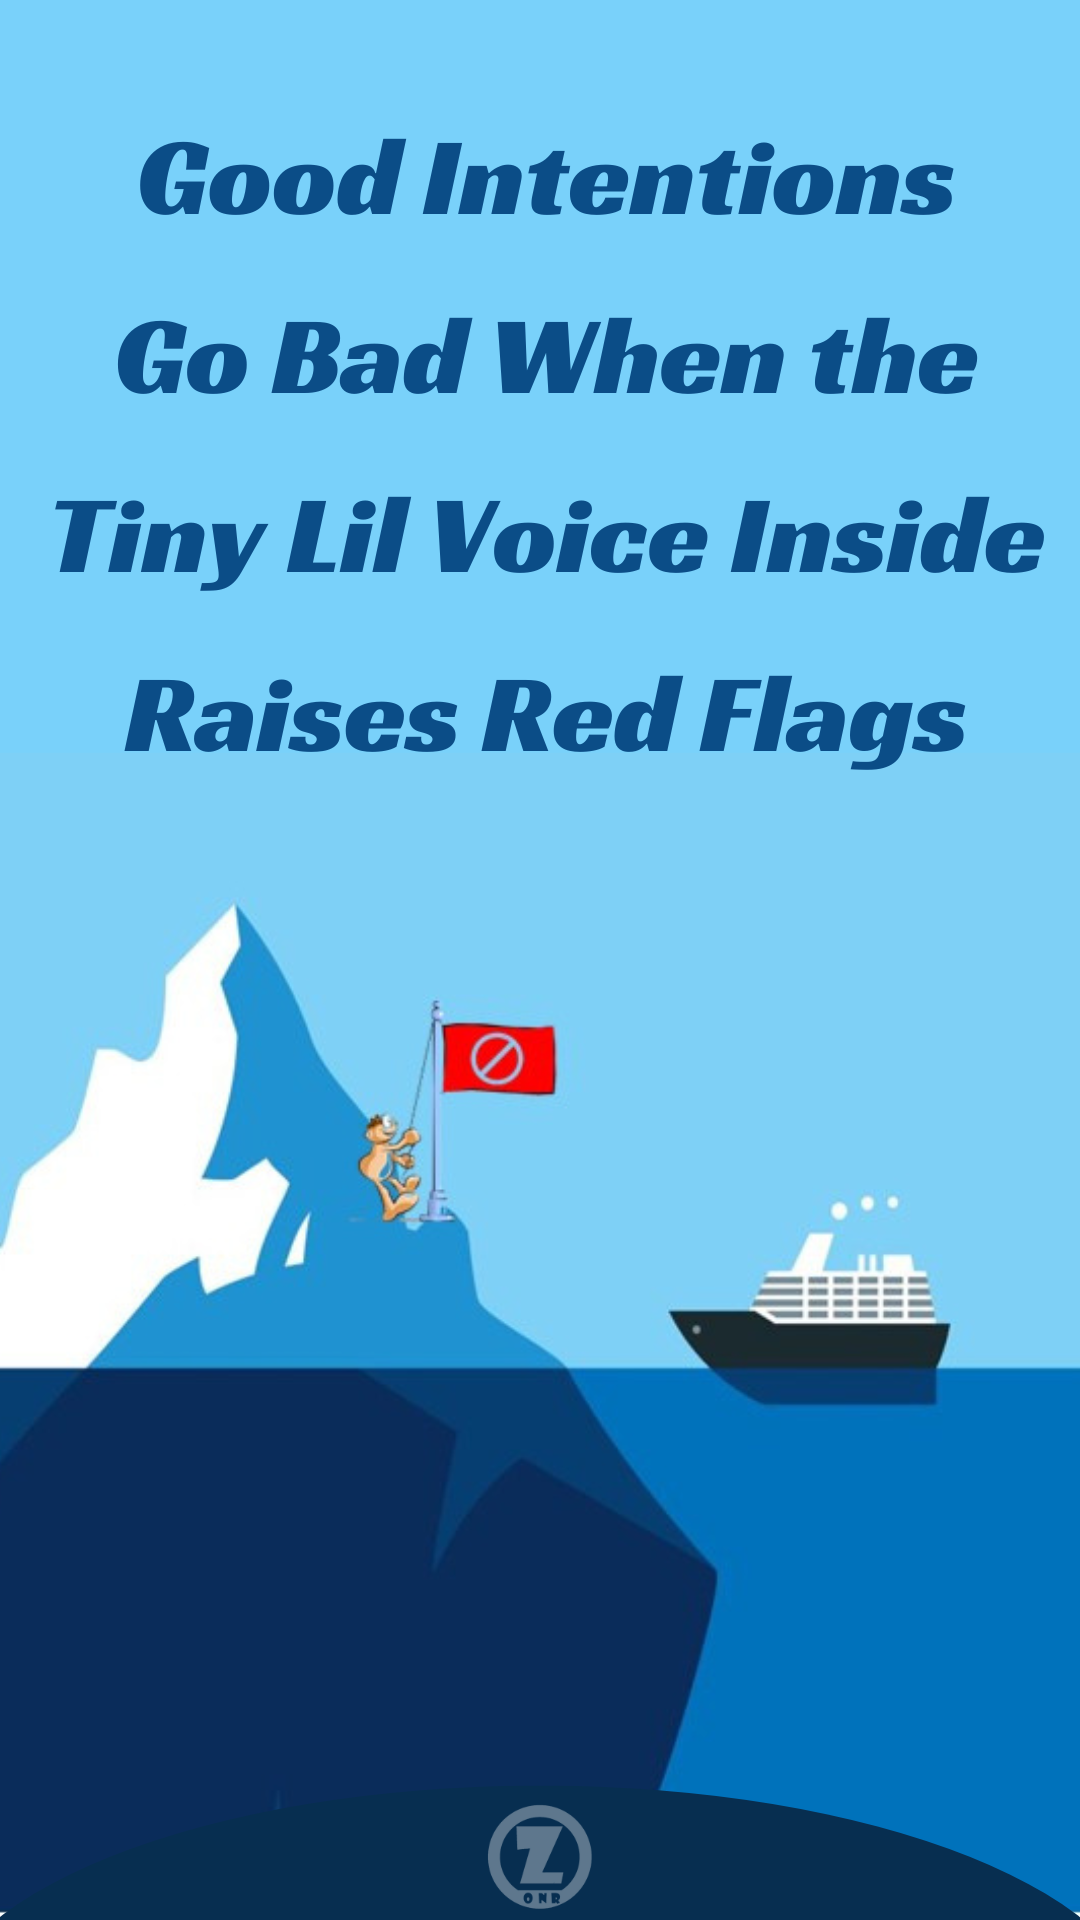 You are currently viewing Good Intentions Go Bad When the Tiny Lil Voice inside Raises Red Flags – Step 11